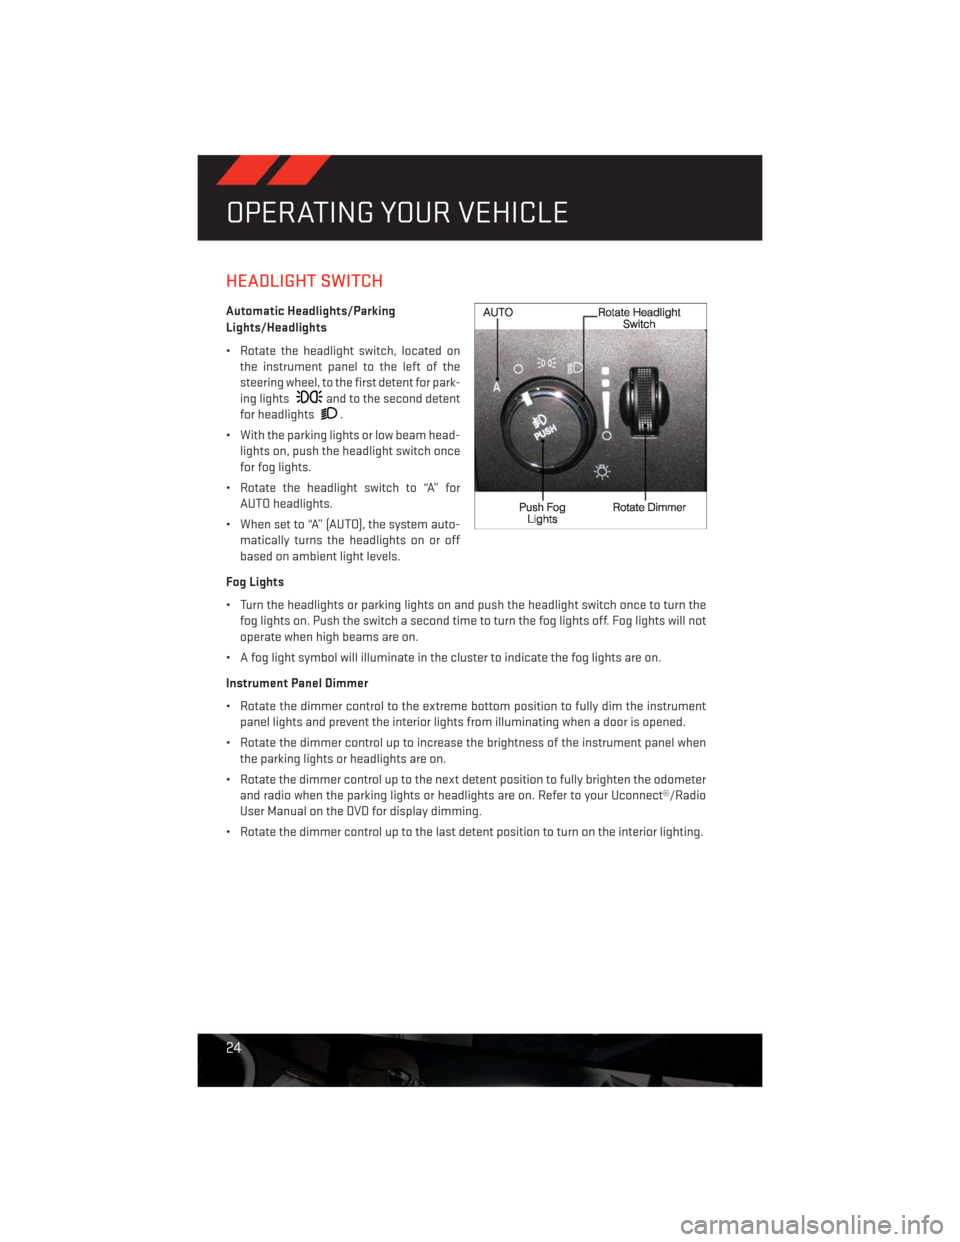 DODGE CHALLENGER 2013 3.G User Guide HEADLIGHT SWITCH
Automatic Headlights/Parking
Lights/Headlights
• Rotate the headlight switch, located on
the instrument panel to the left of the
steering wheel, to the first detent for park-
ing li